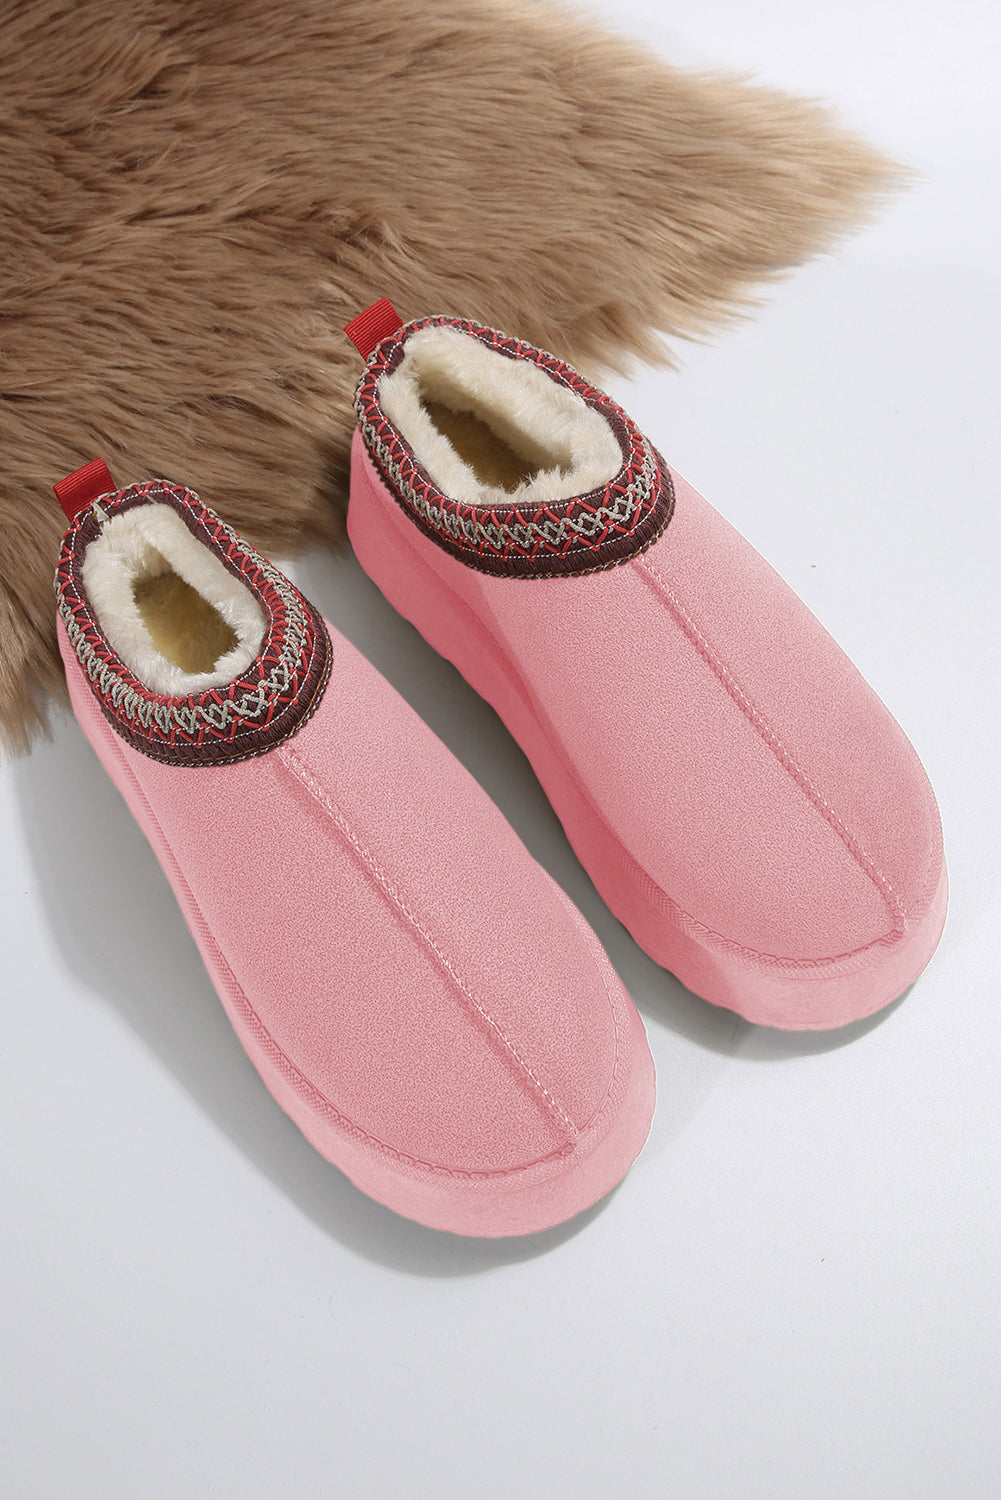 Apricot Pink Suede Contrast Print Plush Lined Snow Boots